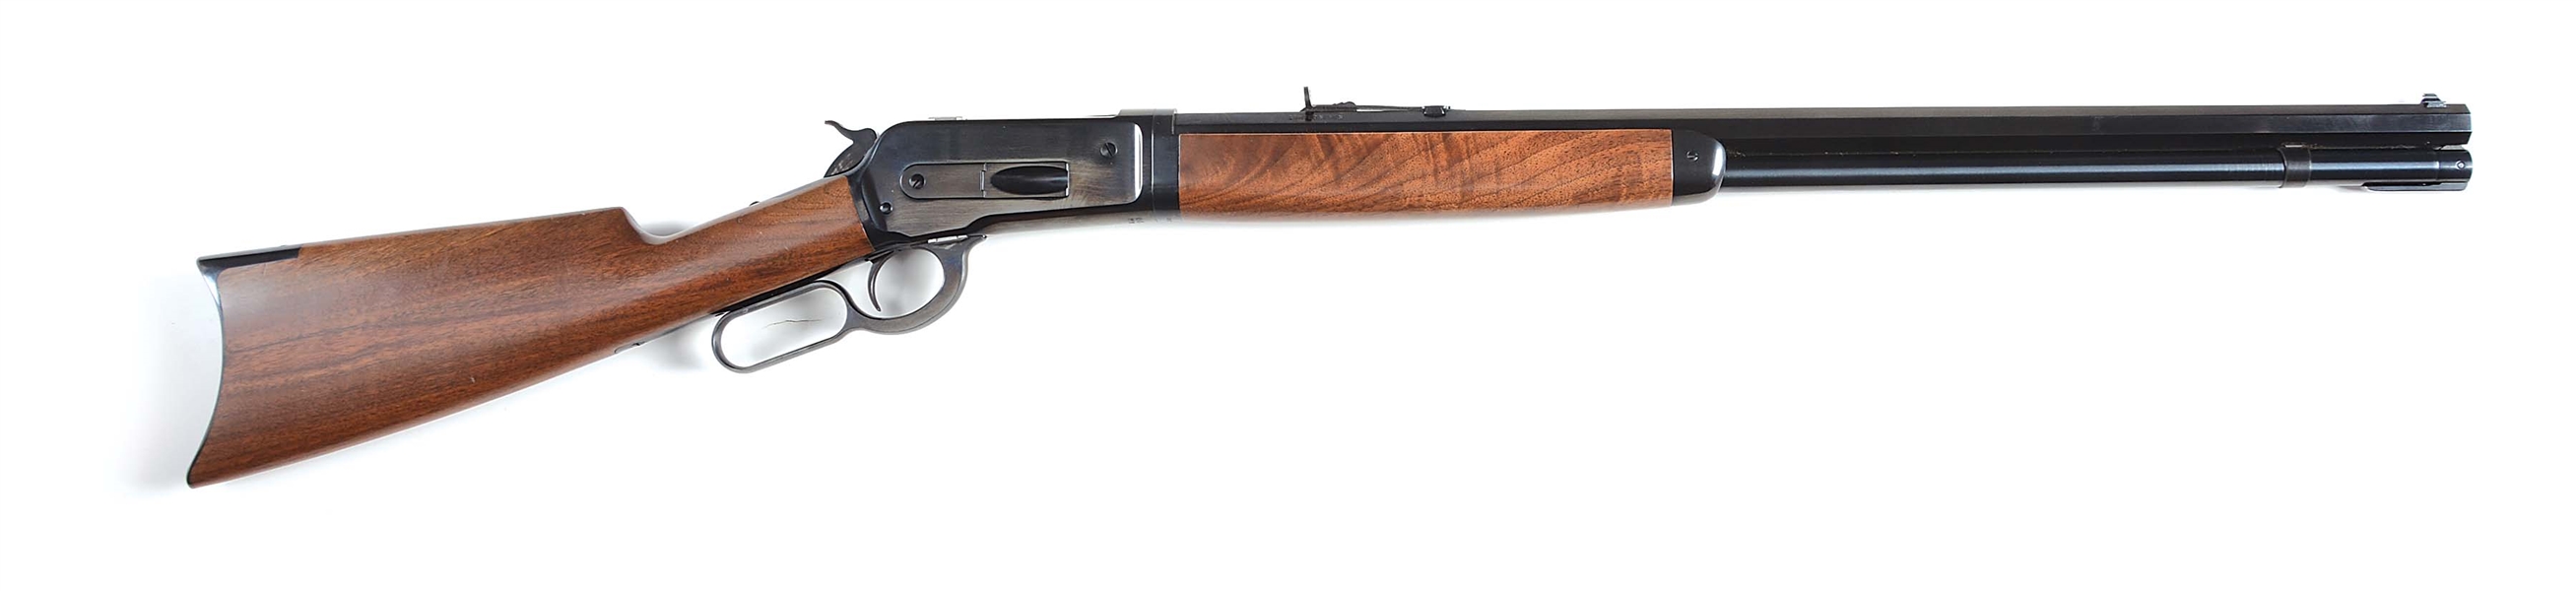 (M) WINCHESTER/US REPEATING ARMS CO. 1886 LEVER-ACTION RIFLE.